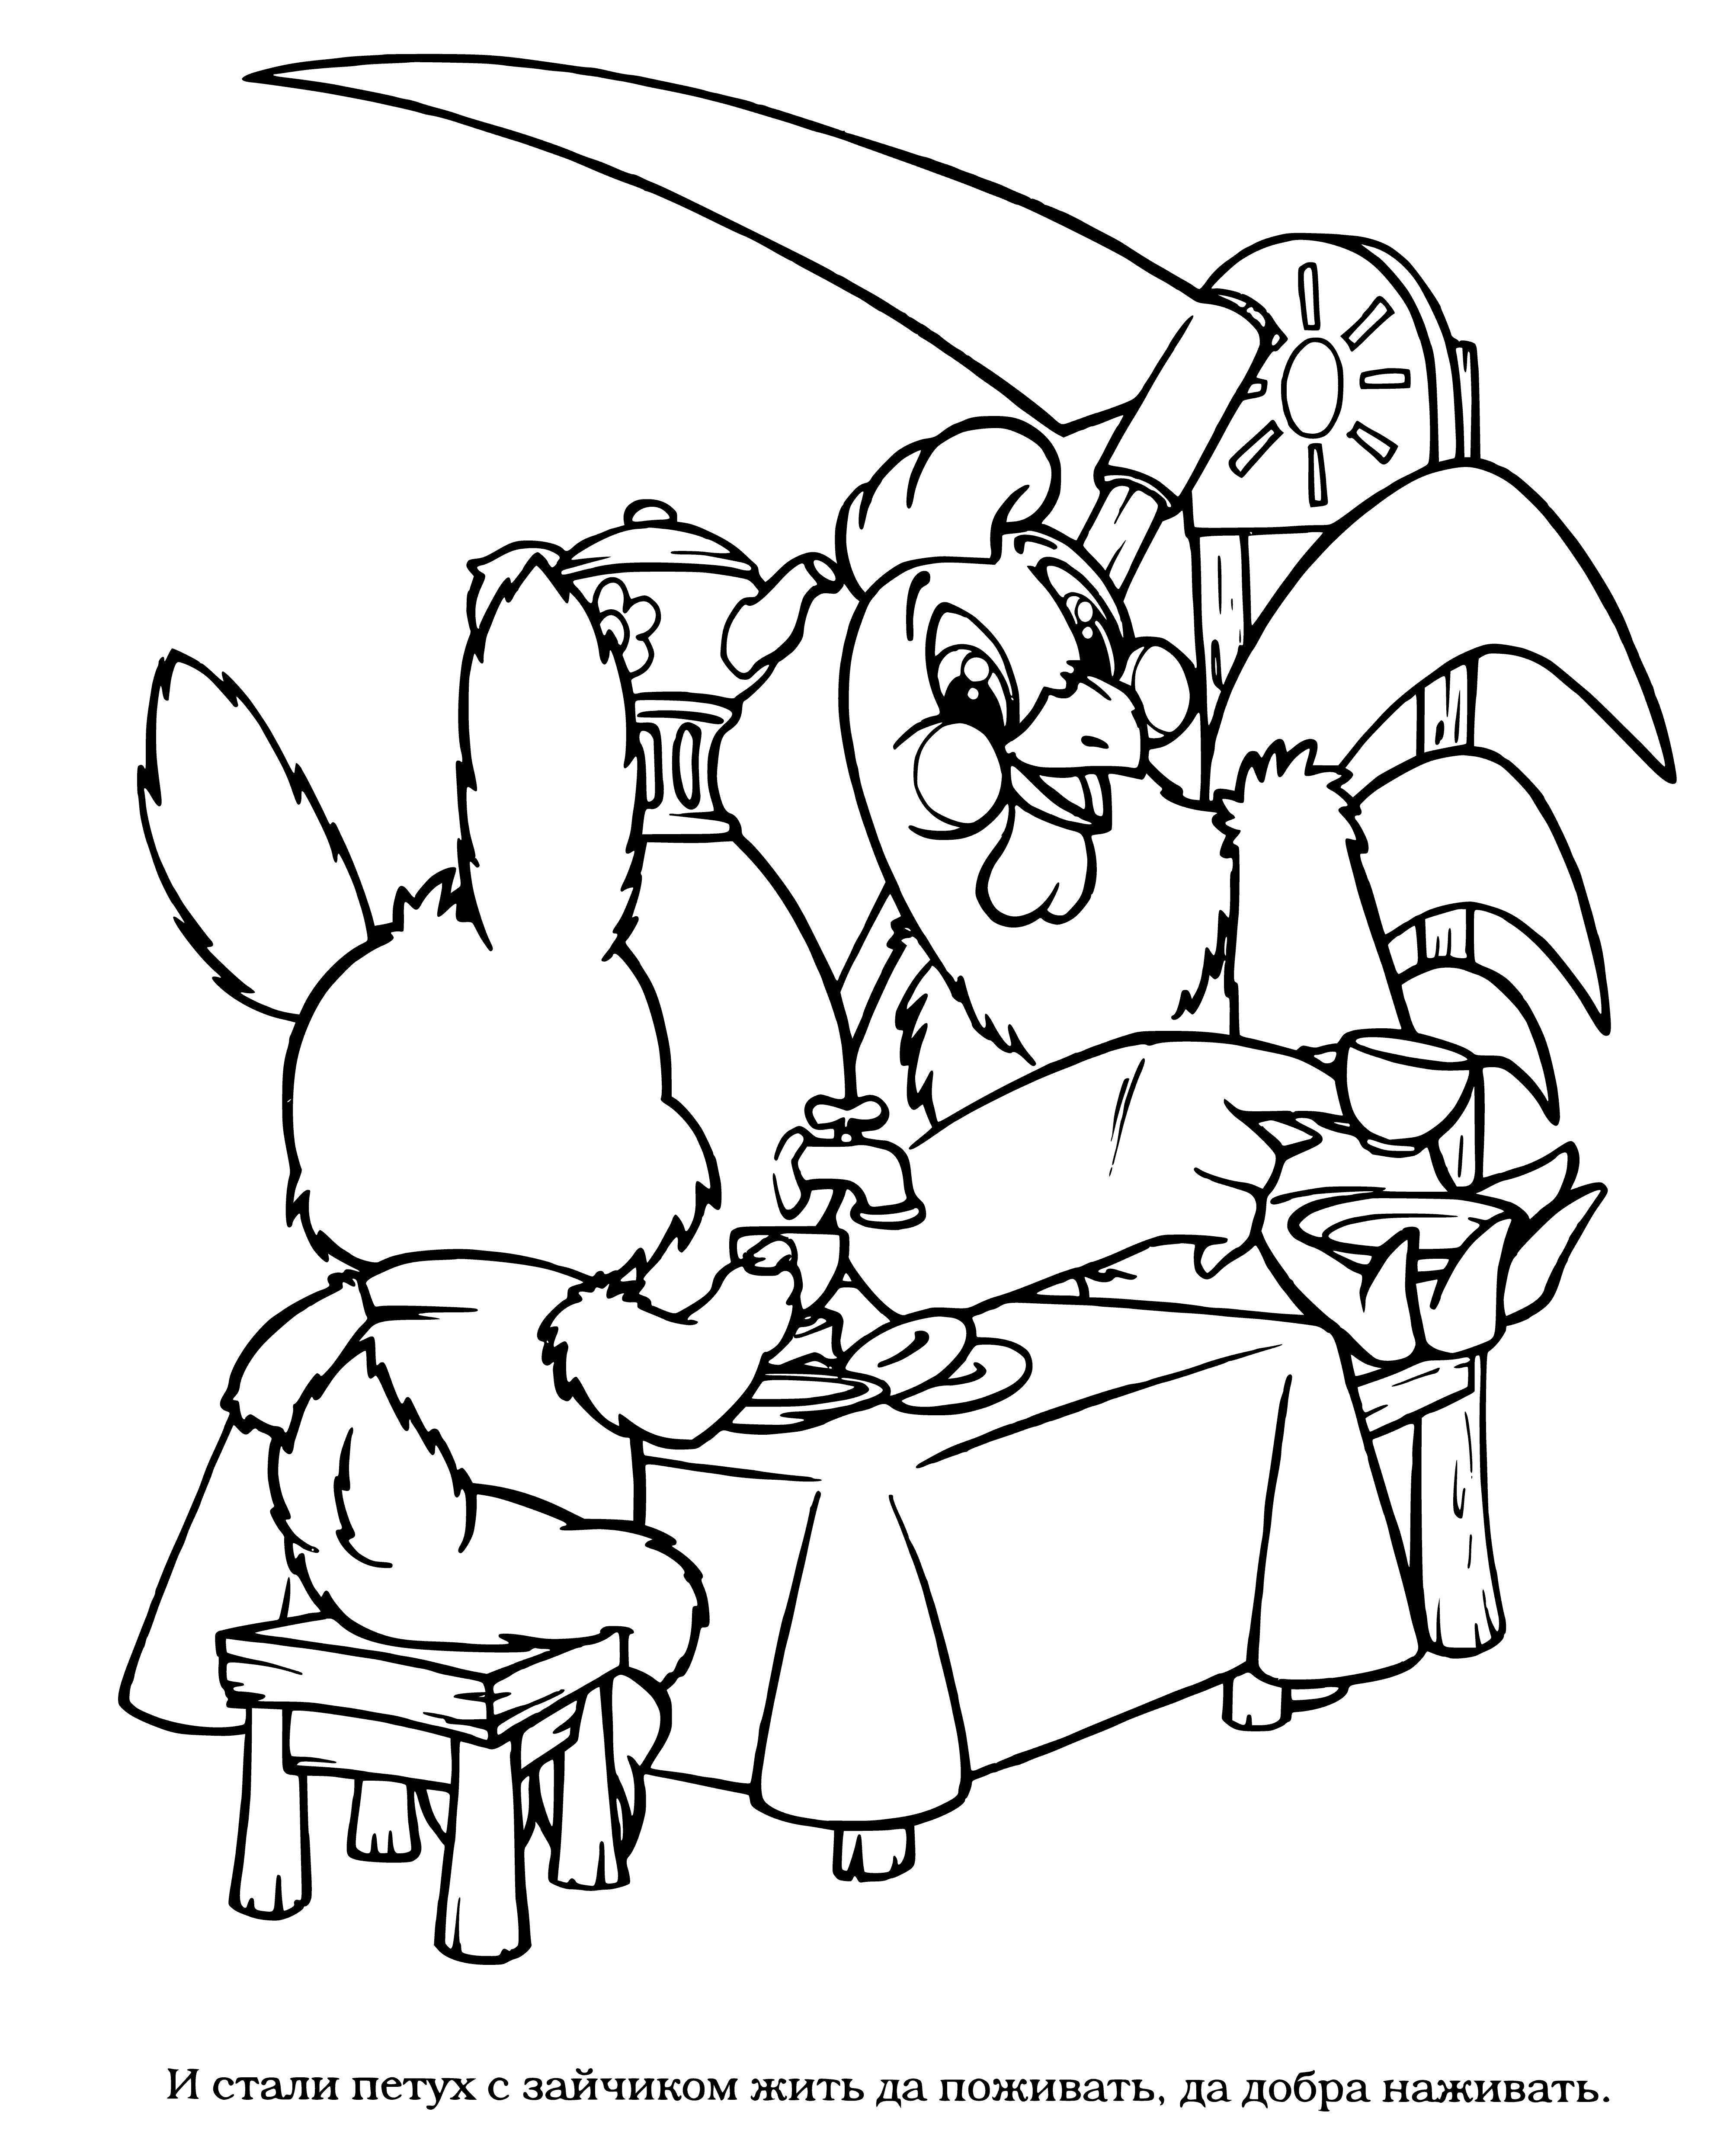 coloring page: Once upon a time a cock & bunny met in a forest & became best friends after the cock offered to be the bunny's friend.